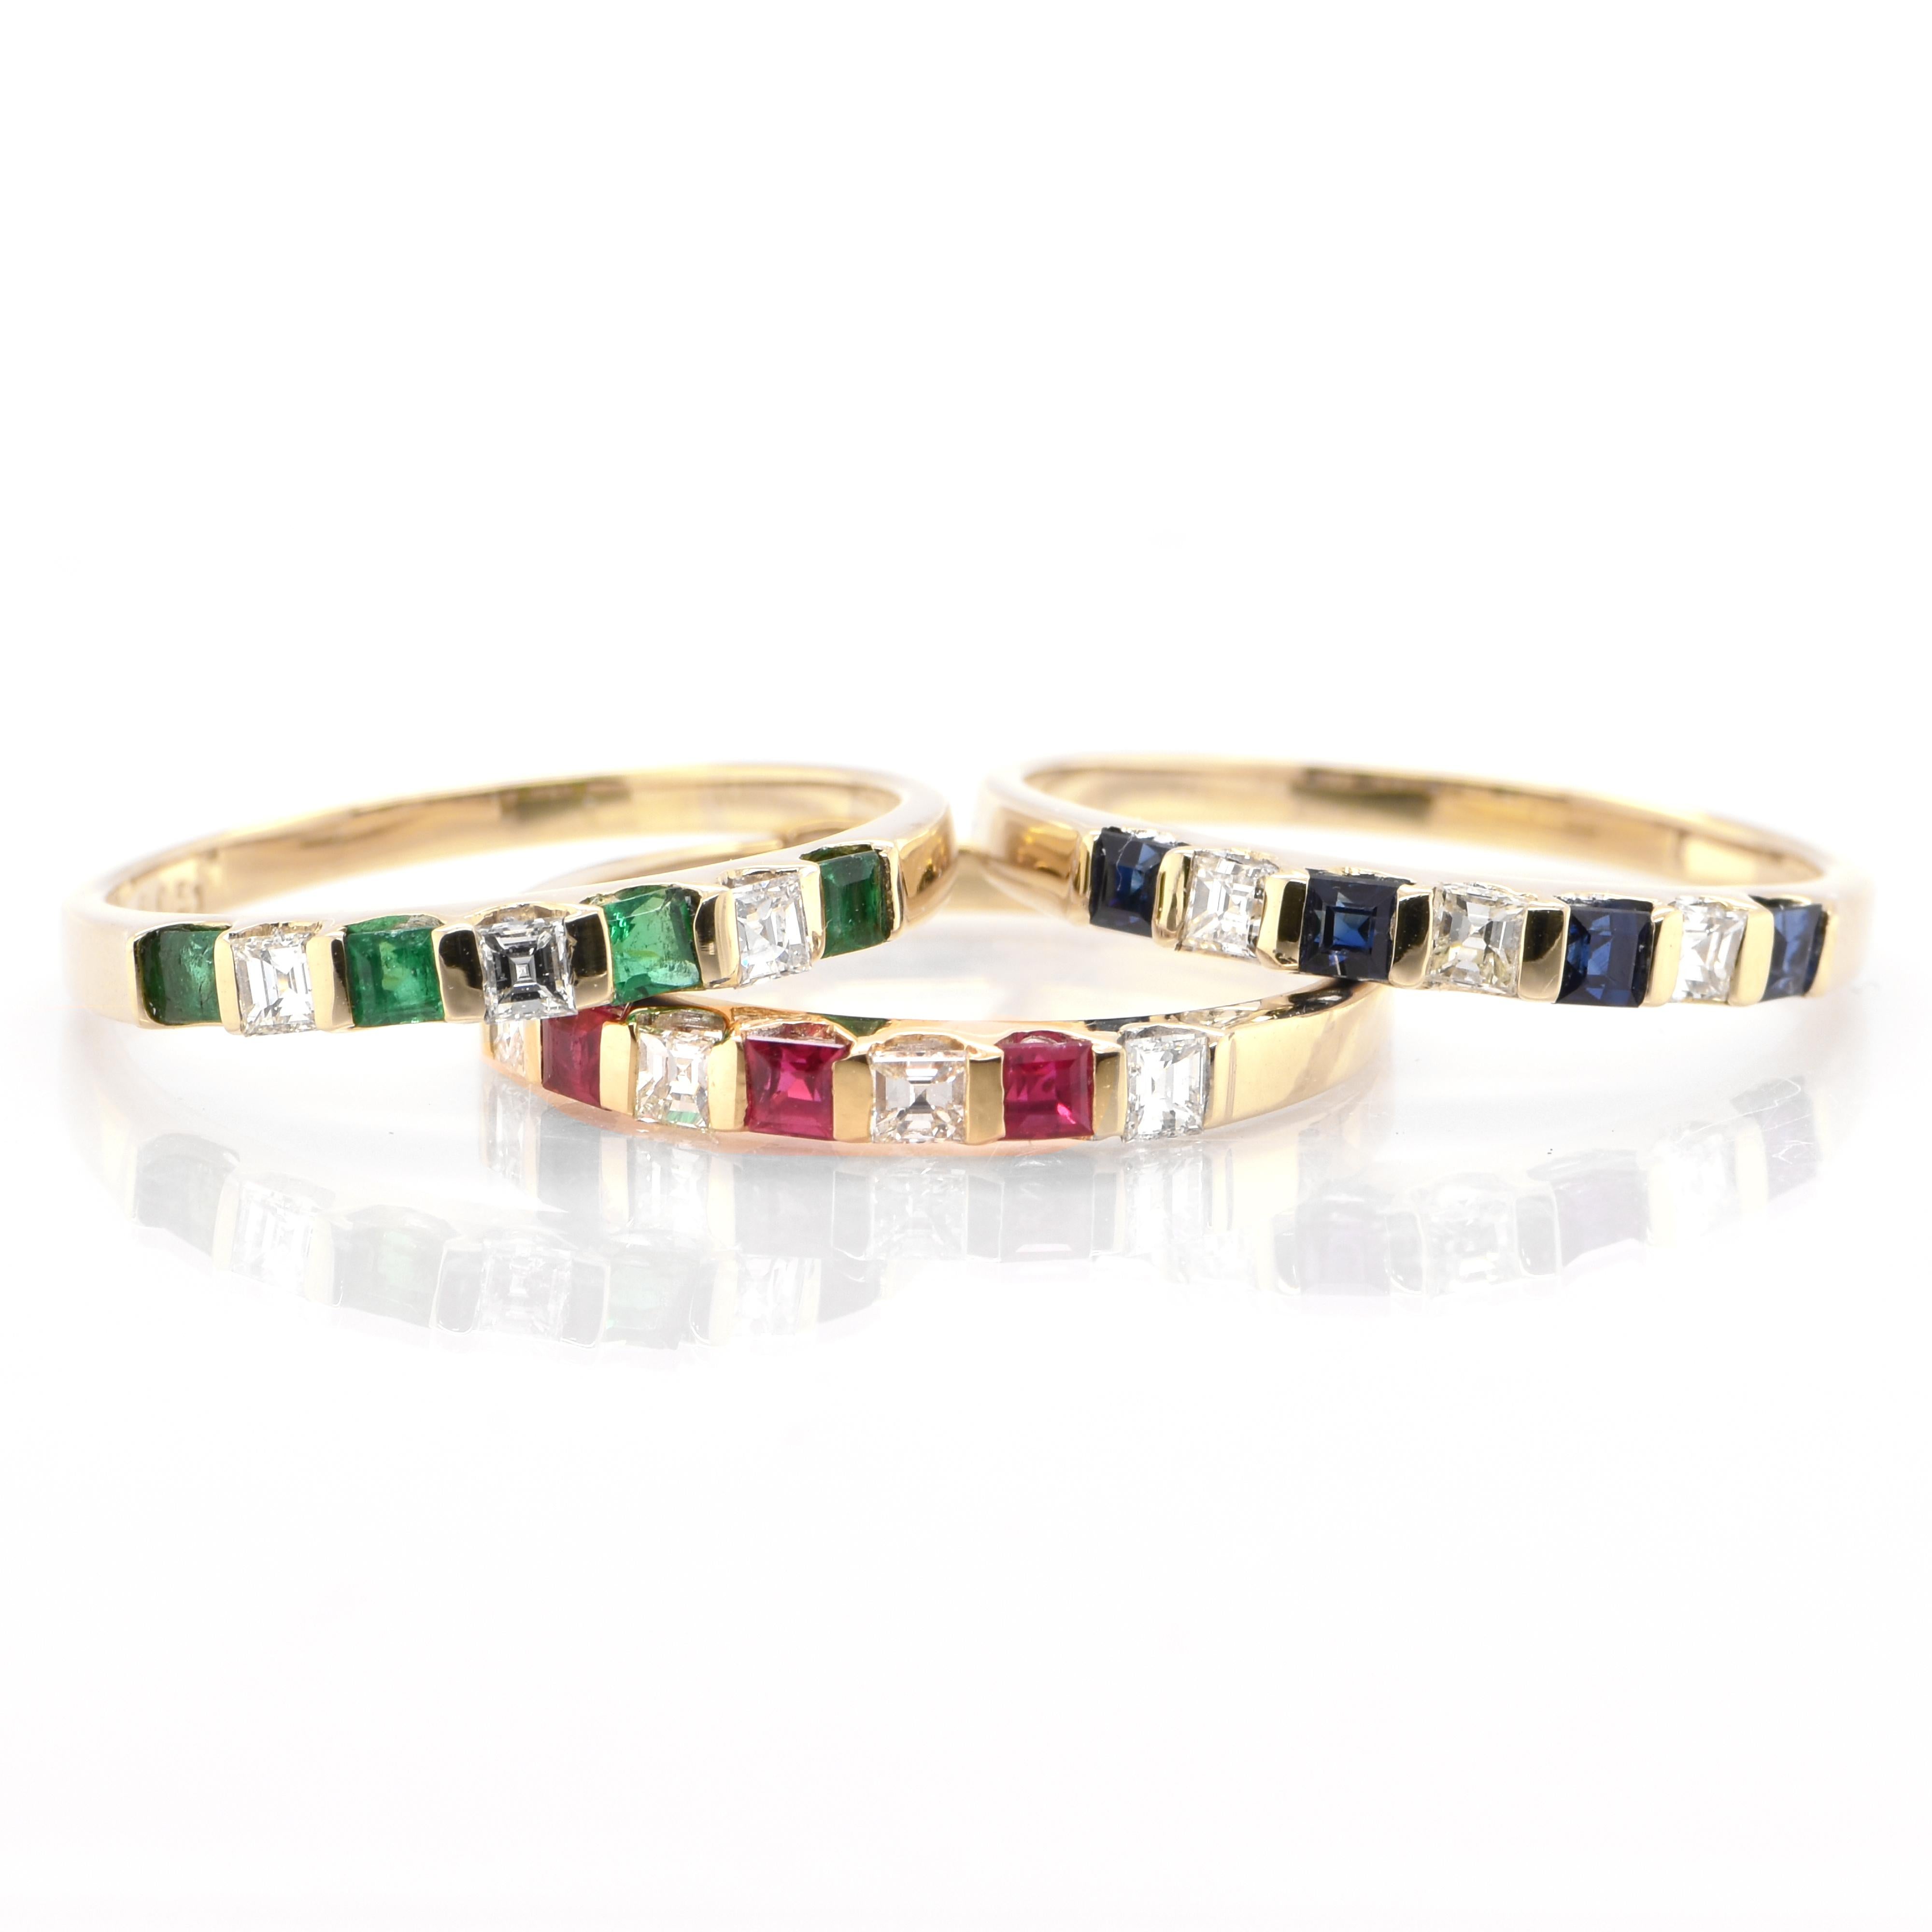 A stunning set of Natural Ruby, Sapphire and Emerald stackable rings set in 18 Karat Yellow Gold. The Ruby ring features 0.26 carats of Natural Rubies and 0.57 carats of Natural Diamonds. The Emerald ring features 0.26 carats of Natural Emeralds and